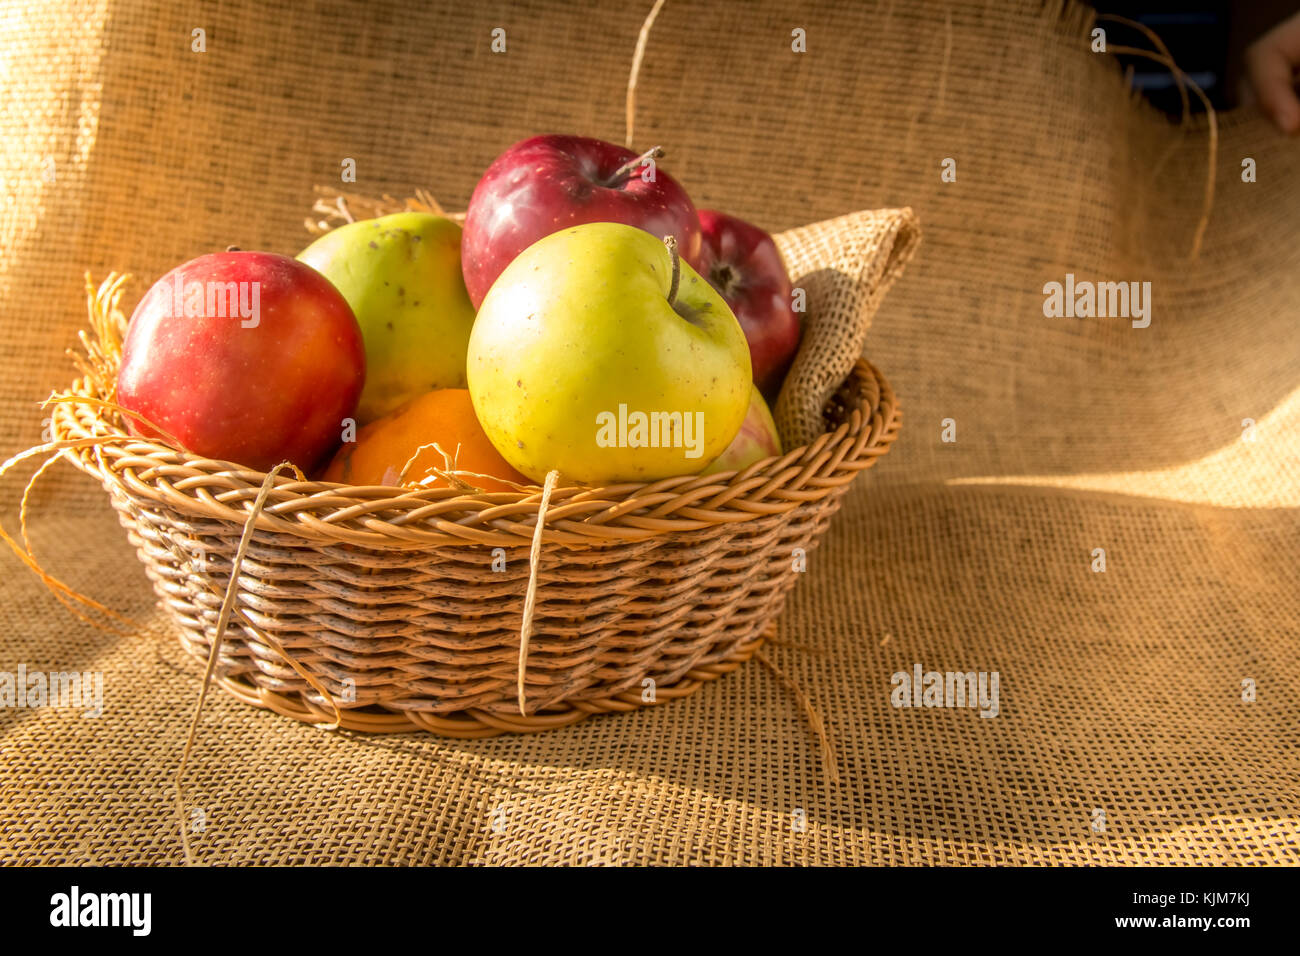 Green and red apples in a basket on burlap background with morning sun shine. Stock Photo